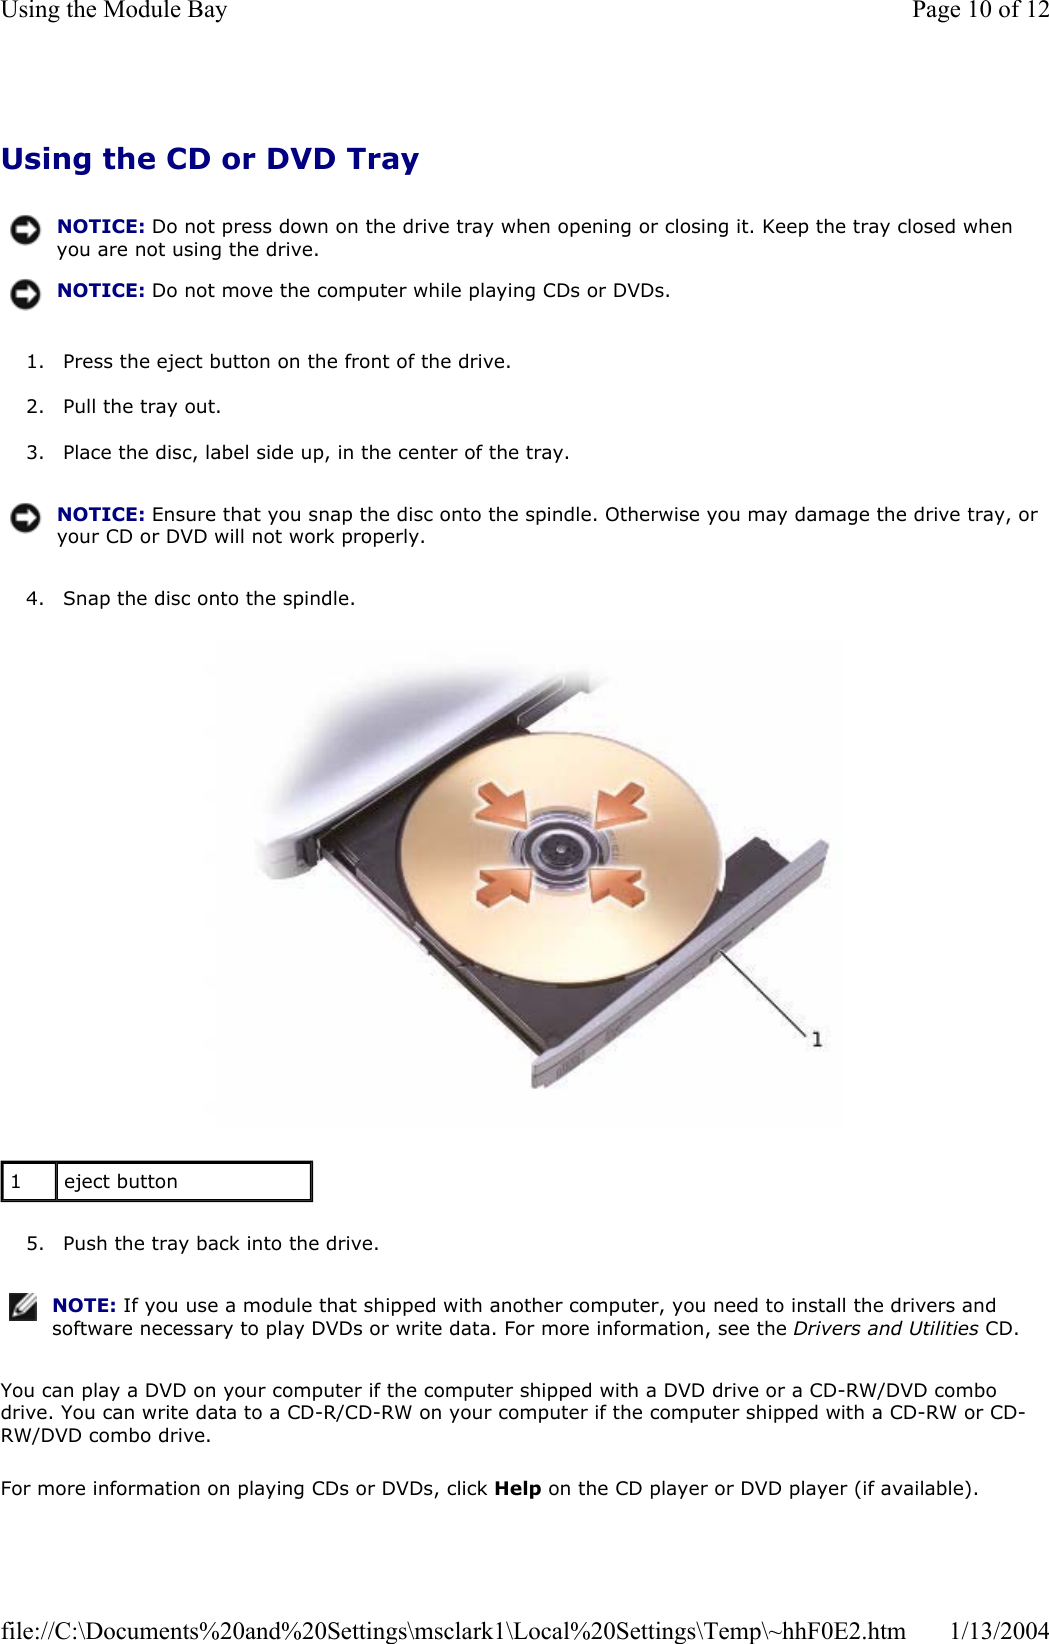 Using the CD or DVD Tray 1. Press the eject button on the front of the drive. 2. Pull the tray out. 3. Place the disc, label side up, in the center of the tray. 4. Snap the disc onto the spindle. 5. Push the tray back into the drive. You can play a DVD on your computer if the computer shipped with a DVD drive or a CD-RW/DVD combo drive. You can write data to a CD-R/CD-RW on your computer if the computer shipped with a CD-RW or CD-RW/DVD combo drive. For more information on playing CDs or DVDs, click Help on the CD player or DVD player (if available). NOTICE: Do not press down on the drive tray when opening or closing it. Keep the tray closed when you are not using the drive.NOTICE: Do not move the computer while playing CDs or DVDs.NOTICE: Ensure that you snap the disc onto the spindle. Otherwise you may damage the drive tray, or your CD or DVD will not work properly.1eject button NOTE: If you use a module that shipped with another computer, you need to install the drivers and software necessary to play DVDs or write data. For more information, see the Drivers and Utilities CD.Page 10 of 12Using the Module Bay1/13/2004file://C:\Documents%20and%20Settings\msclark1\Local%20Settings\Temp\~hhF0E2.htm